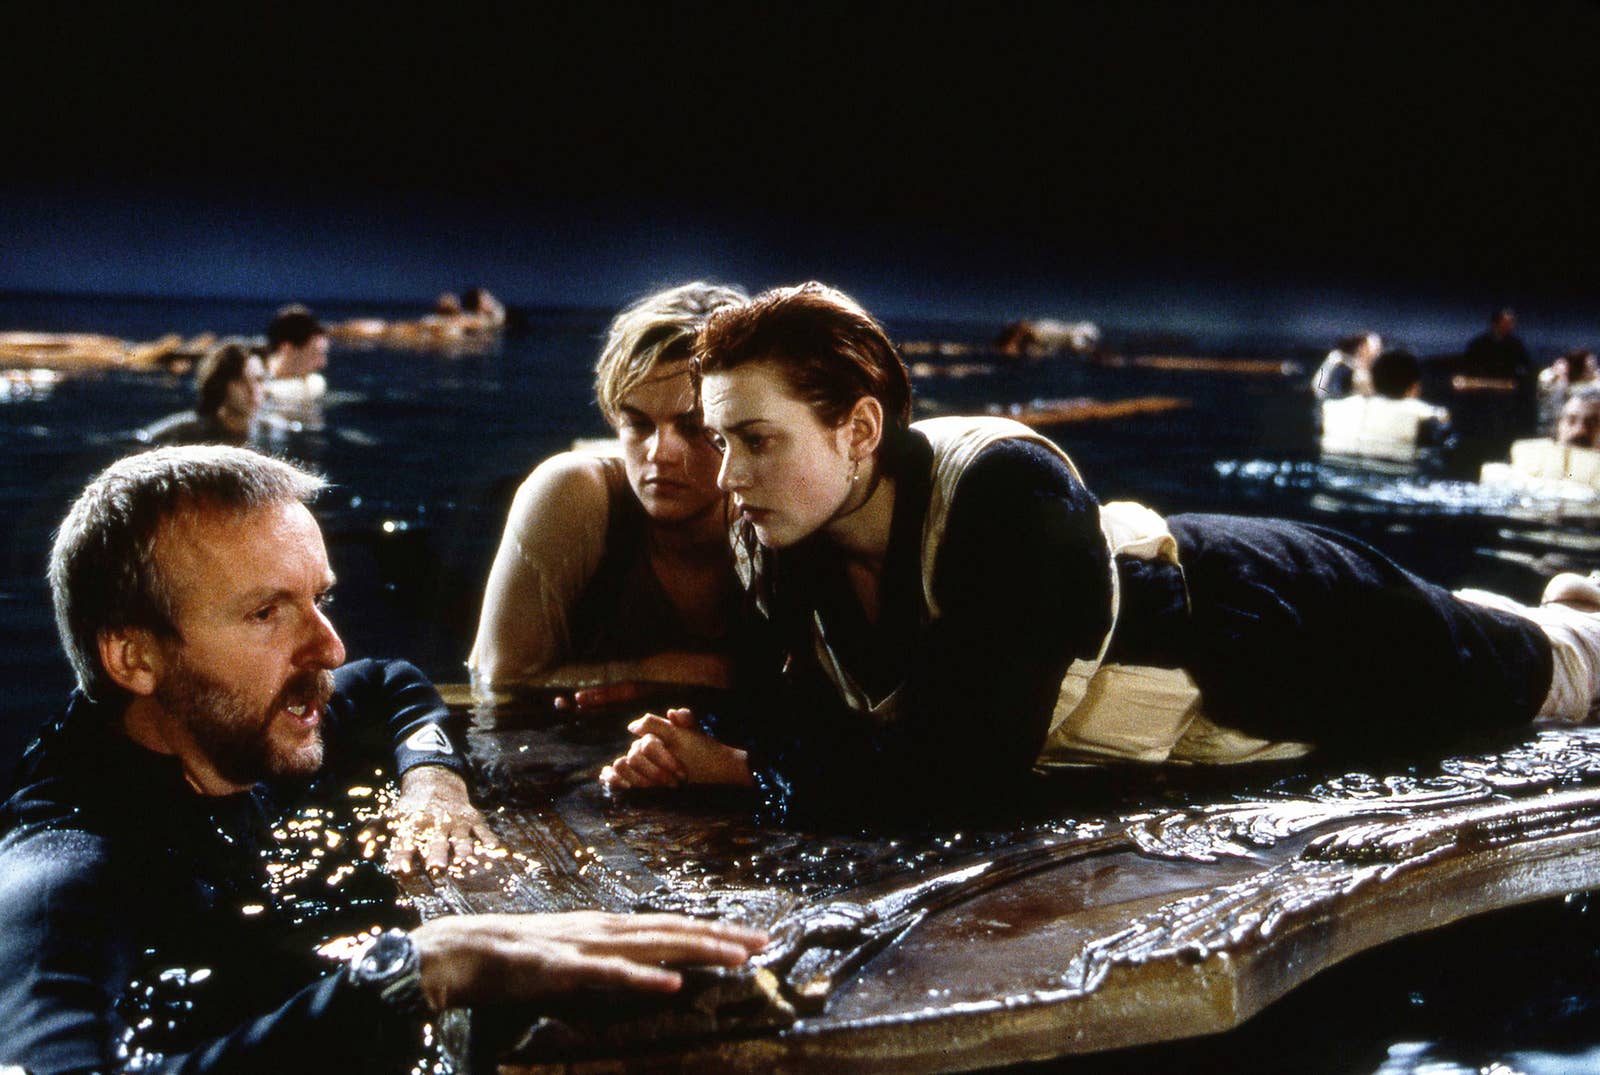 See Rare Behind-The-Scenes Photos From “Titanic”